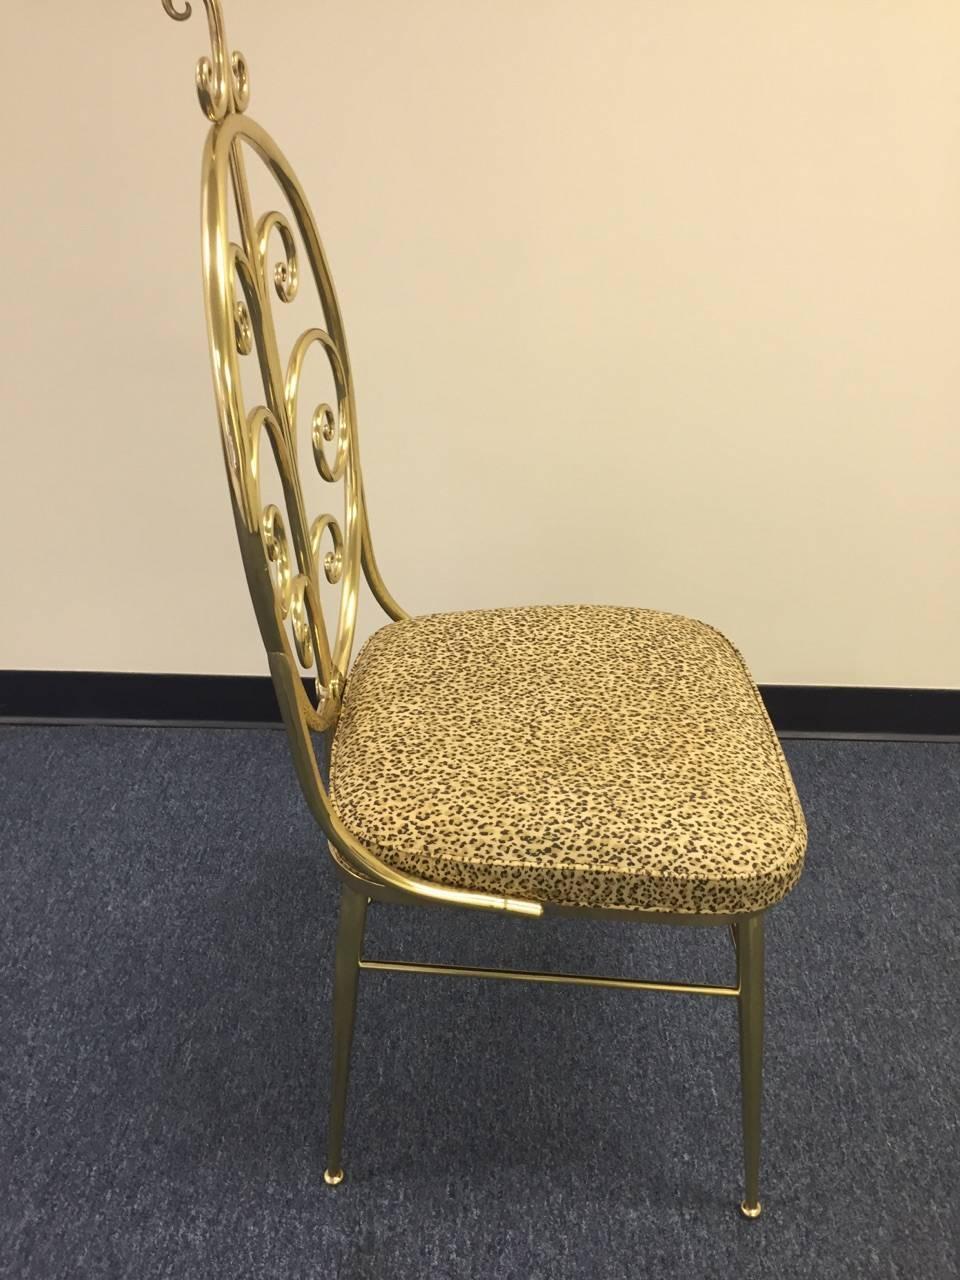 Four very chic Italian polished brass dining chairs with a wonderful whimsical curlicue motiffe. Seats are upholstered in the original faux leopard cotton.